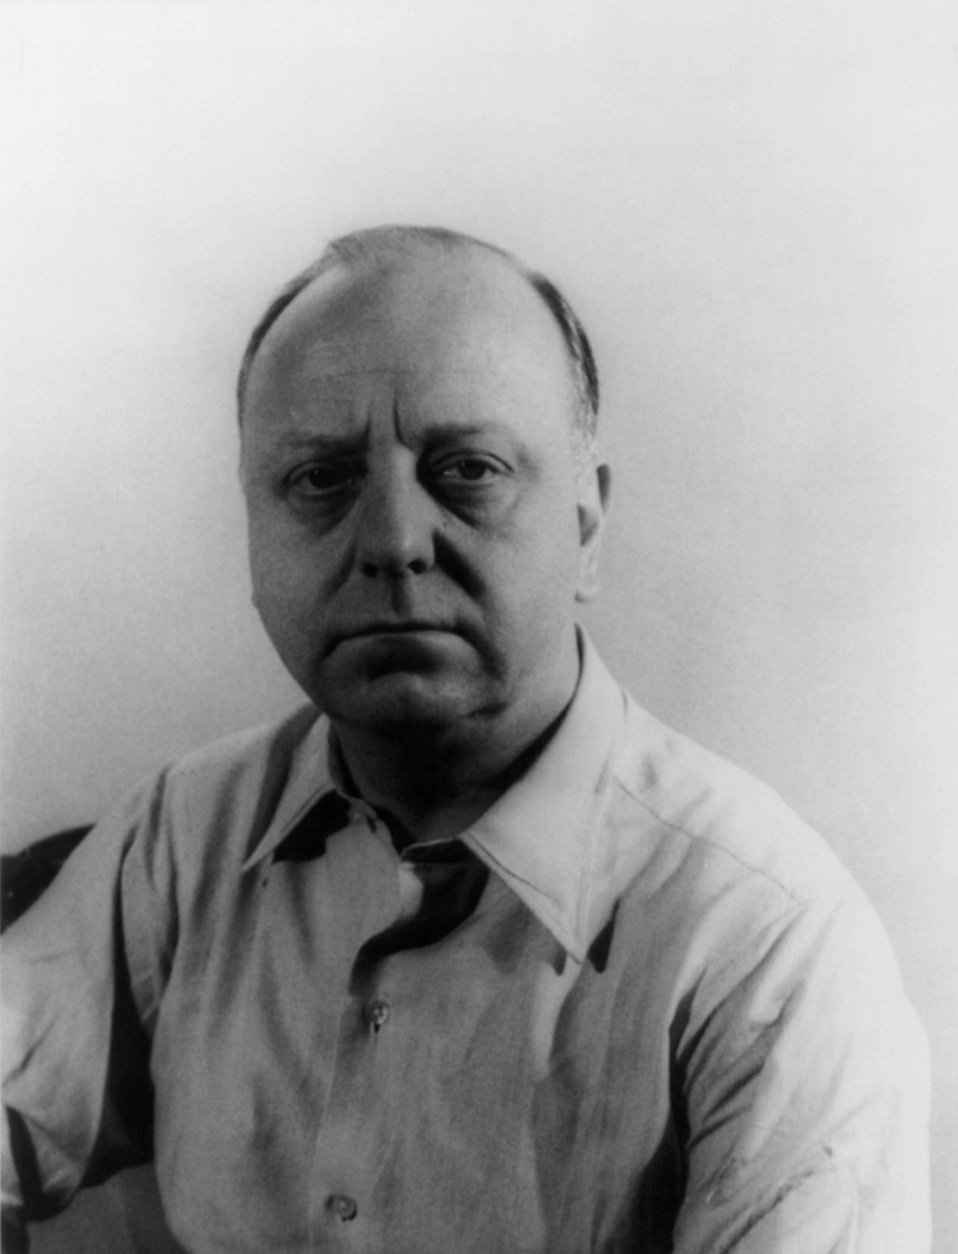 American composer and Kansas City native Virgil Thomson is the subject of a forthcoming PBS documentary by veteran filmmakers James Arntz and John Paulson working with KC-based producer Aimee Larrabee. (Carl Van Vechten Photographs Collection at the Library of Congress)